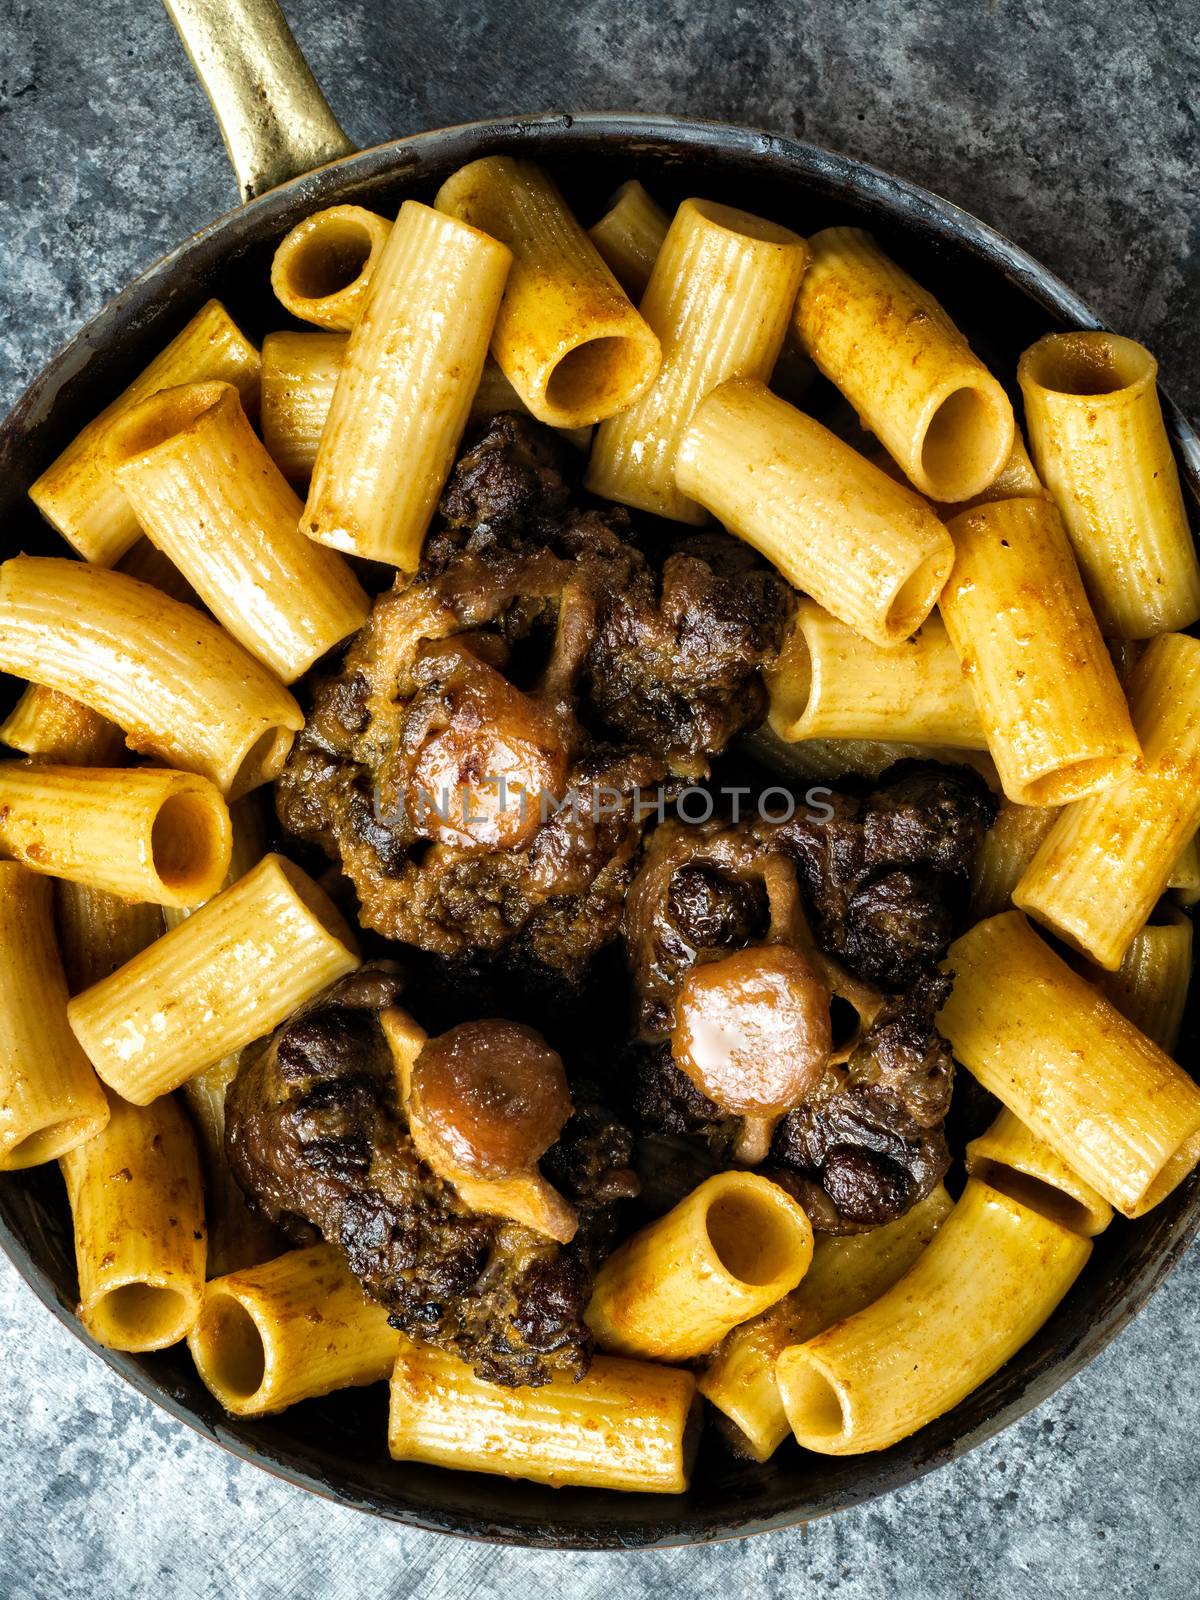 rustic italian oxtail ragu pasta by zkruger